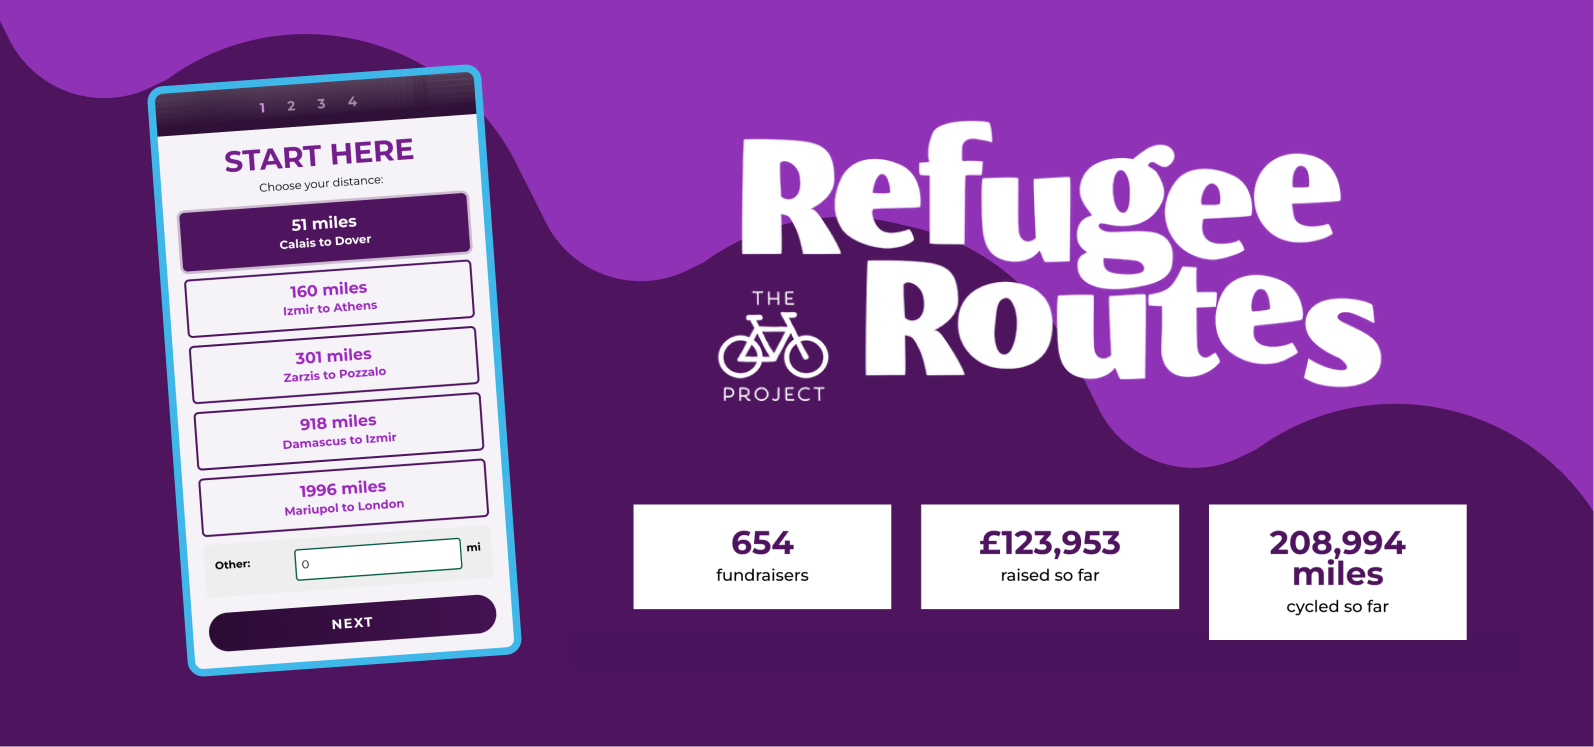 Screenshot of the Refugee Routes campaign.